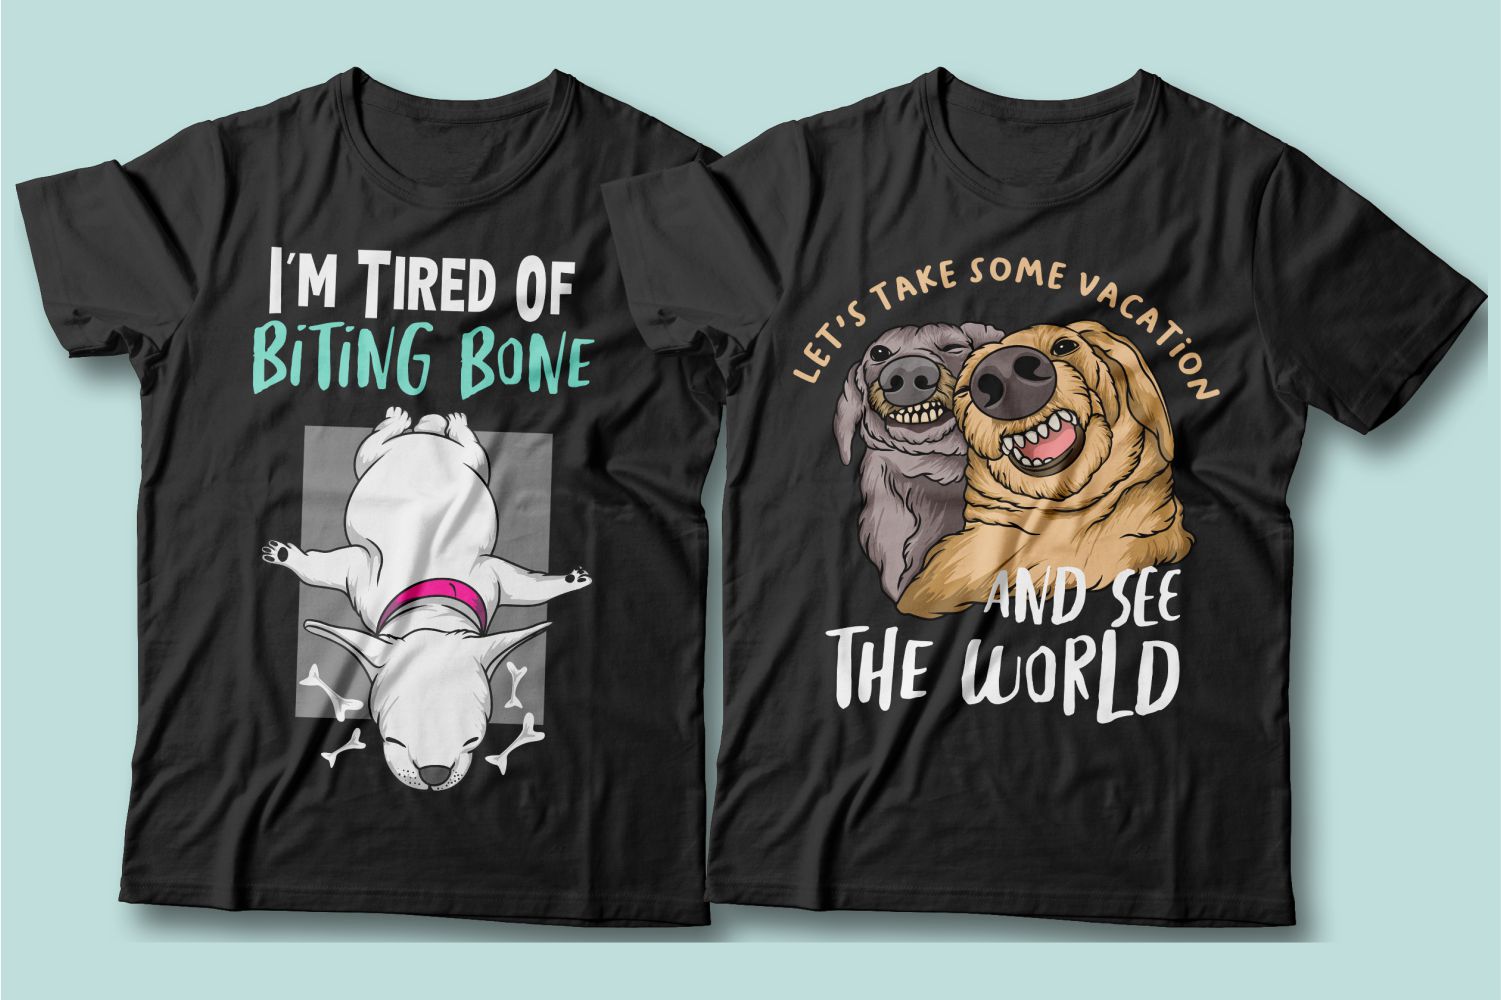 Tired and cocky dogs. These black T-shirts will add some extra dimension to your look.